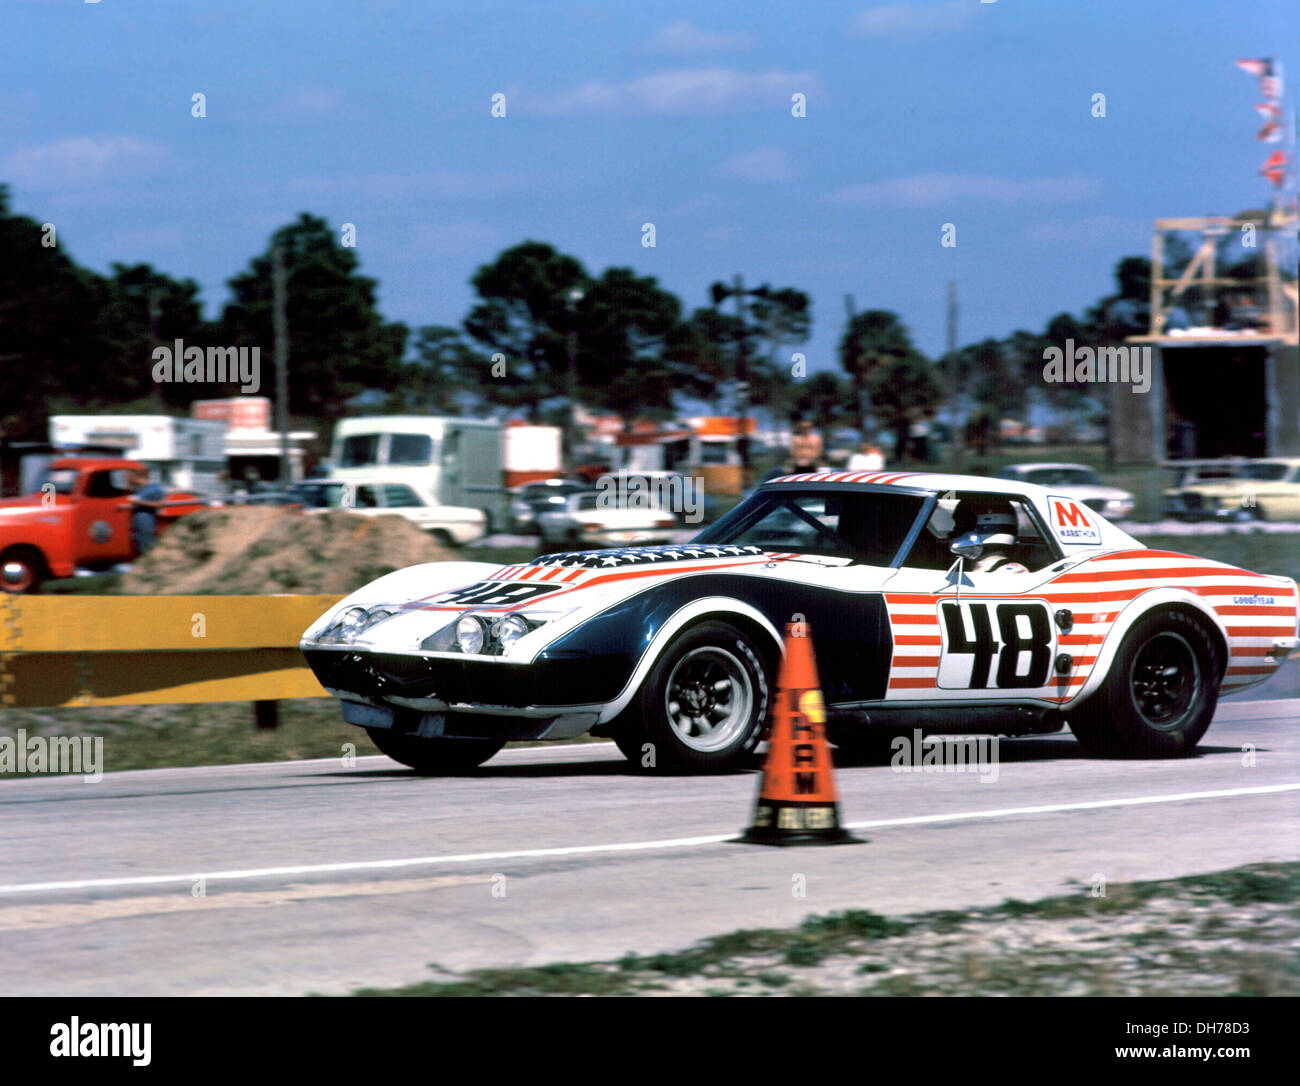 John Greenwood-Dick Smothers' Chevrolet Corvette finished 7th at Sebring 12 hrs, Florida, USA 20 March 1971. Stock Photo